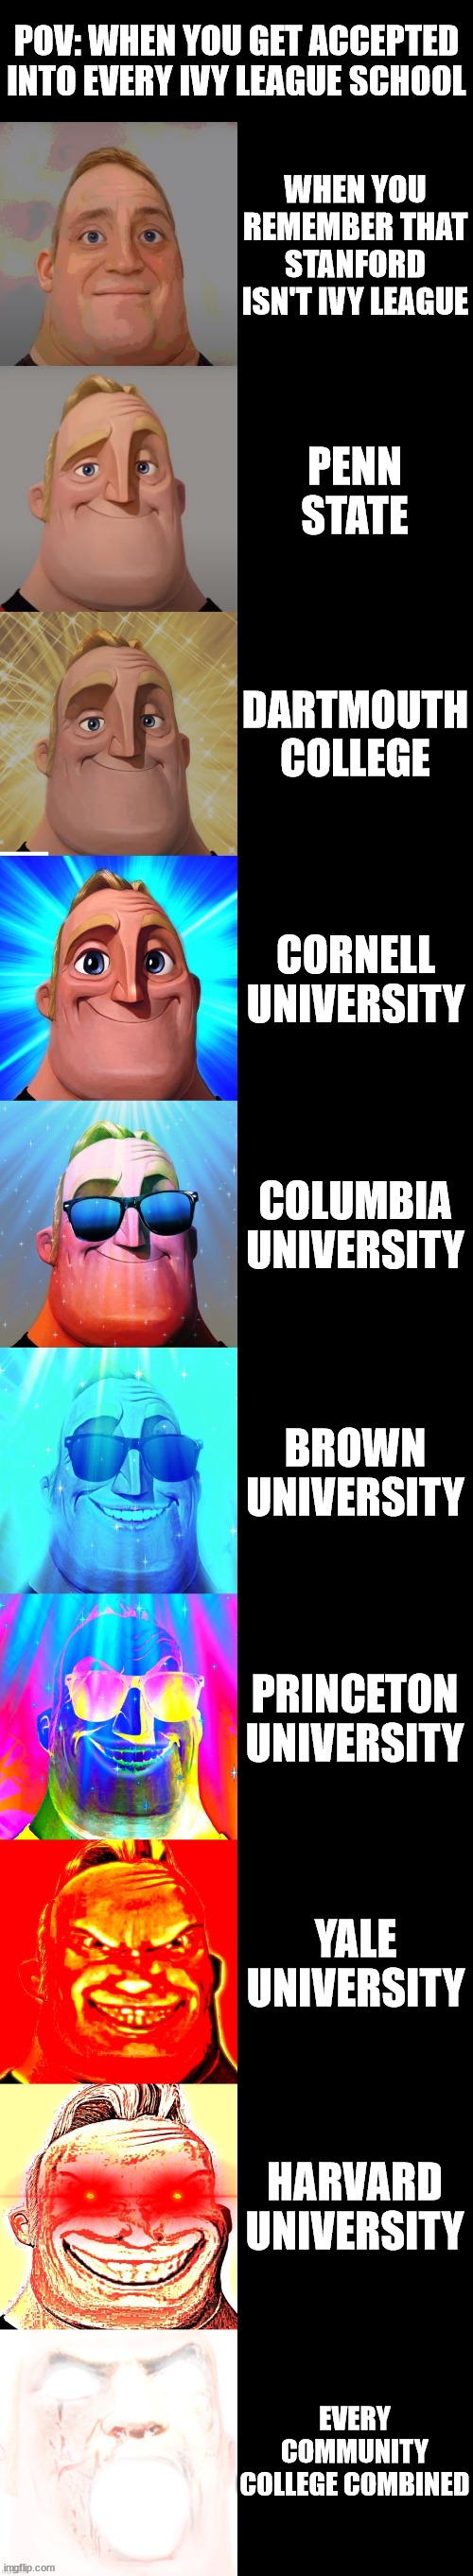 mr incredible becoming canny | POV: WHEN YOU GET ACCEPTED INTO EVERY IVY LEAGUE SCHOOL; WHEN YOU REMEMBER THAT STANFORD ISN'T IVY LEAGUE; PENN STATE; DARTMOUTH COLLEGE; CORNELL UNIVERSITY; COLUMBIA UNIVERSITY; BROWN UNIVERSITY; PRINCETON UNIVERSITY; YALE UNIVERSITY; HARVARD UNIVERSITY; EVERY COMMUNITY COLLEGE COMBINED | image tagged in mr incredible becoming canny | made w/ Imgflip meme maker